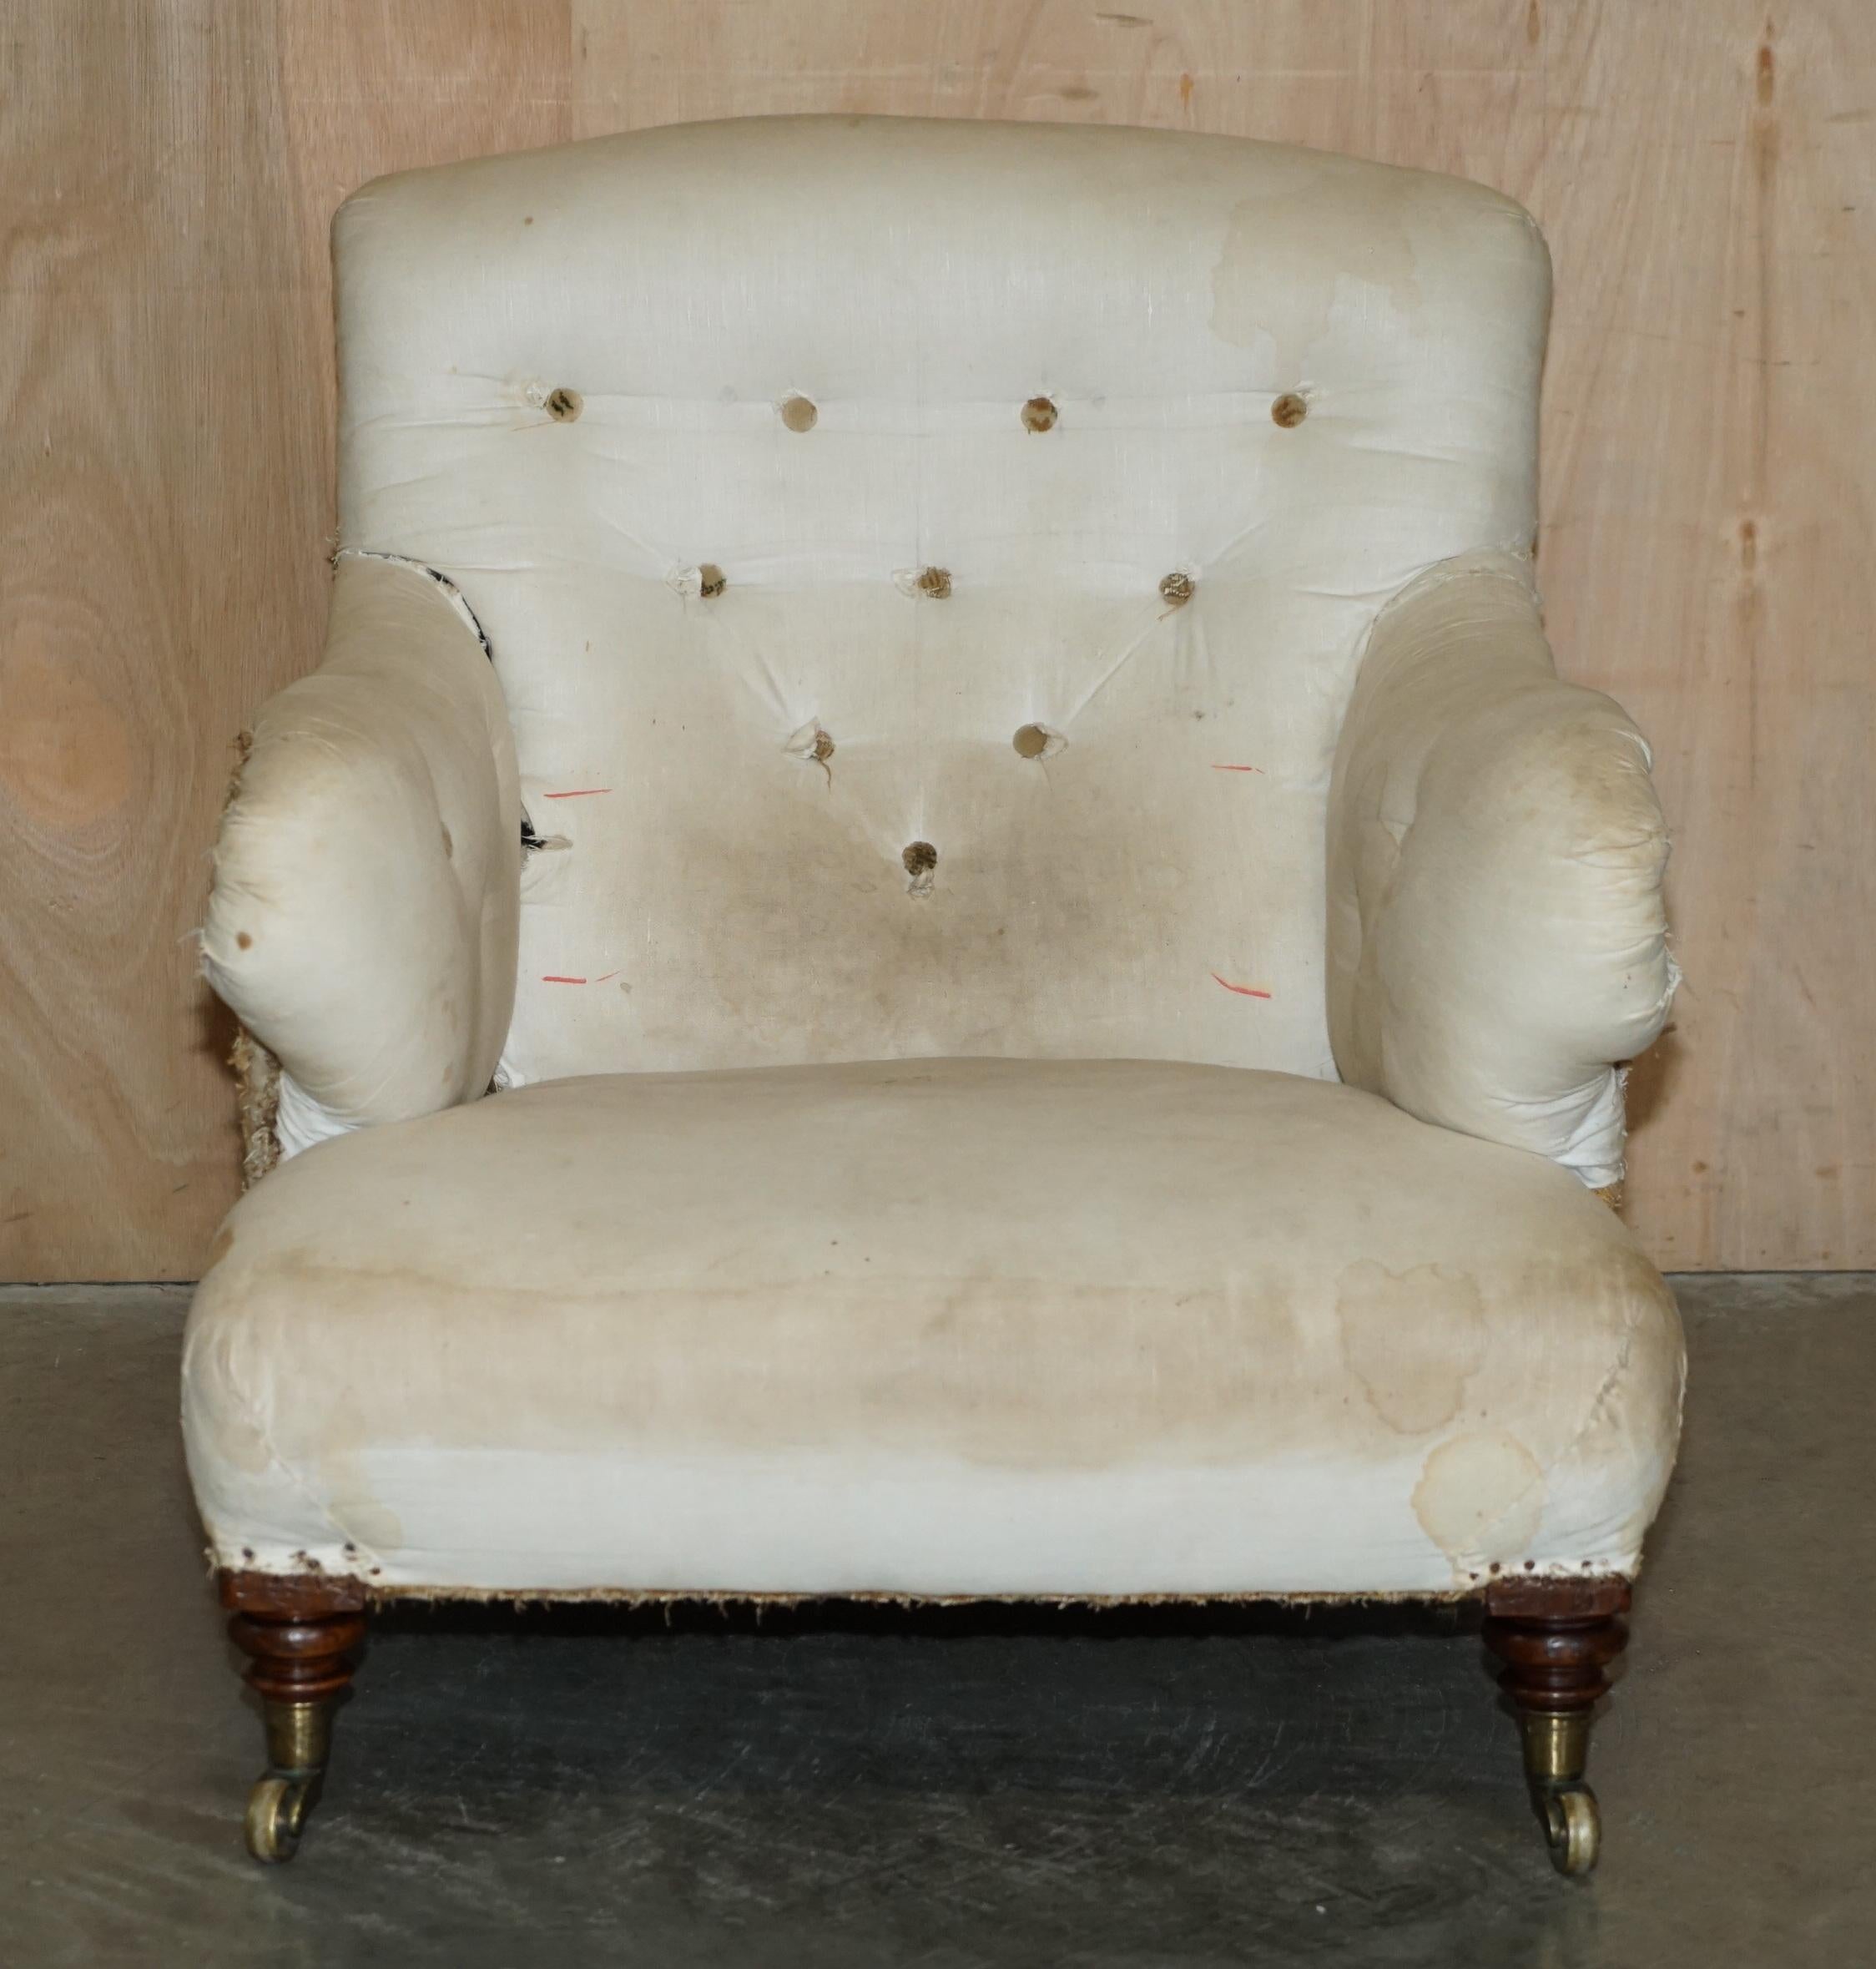 Victorian PAIR OF ORIGINAL ViCTORIAN HOWARD & SON'S BRIDGEWATER ARMCHAIRS FOR REUPHOLSTERY For Sale